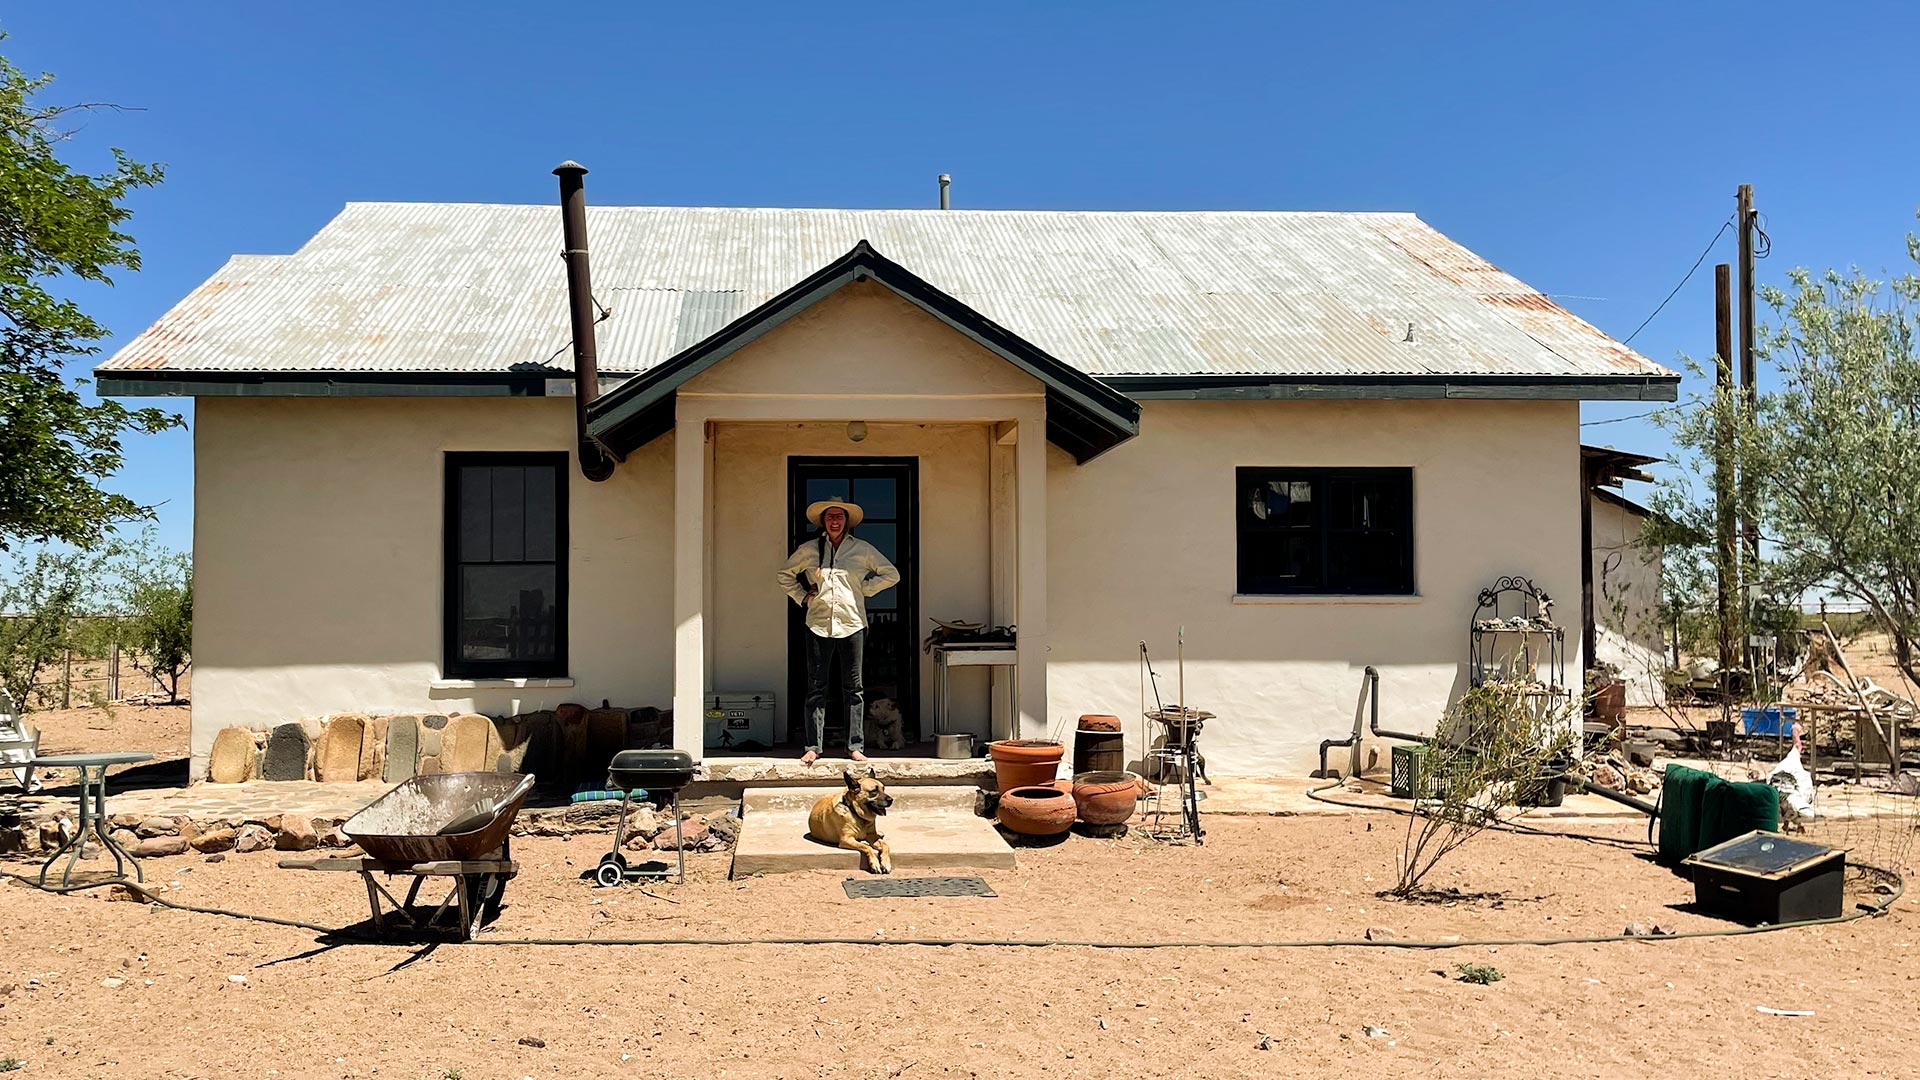 Rabin's house sits just down the road from a border checkpoint, in a corner of Arizona where water is drying up so quickly that many of her neighbors have spent tens of thousands of dollars to deepen their wells, or dig new ones altogether. 